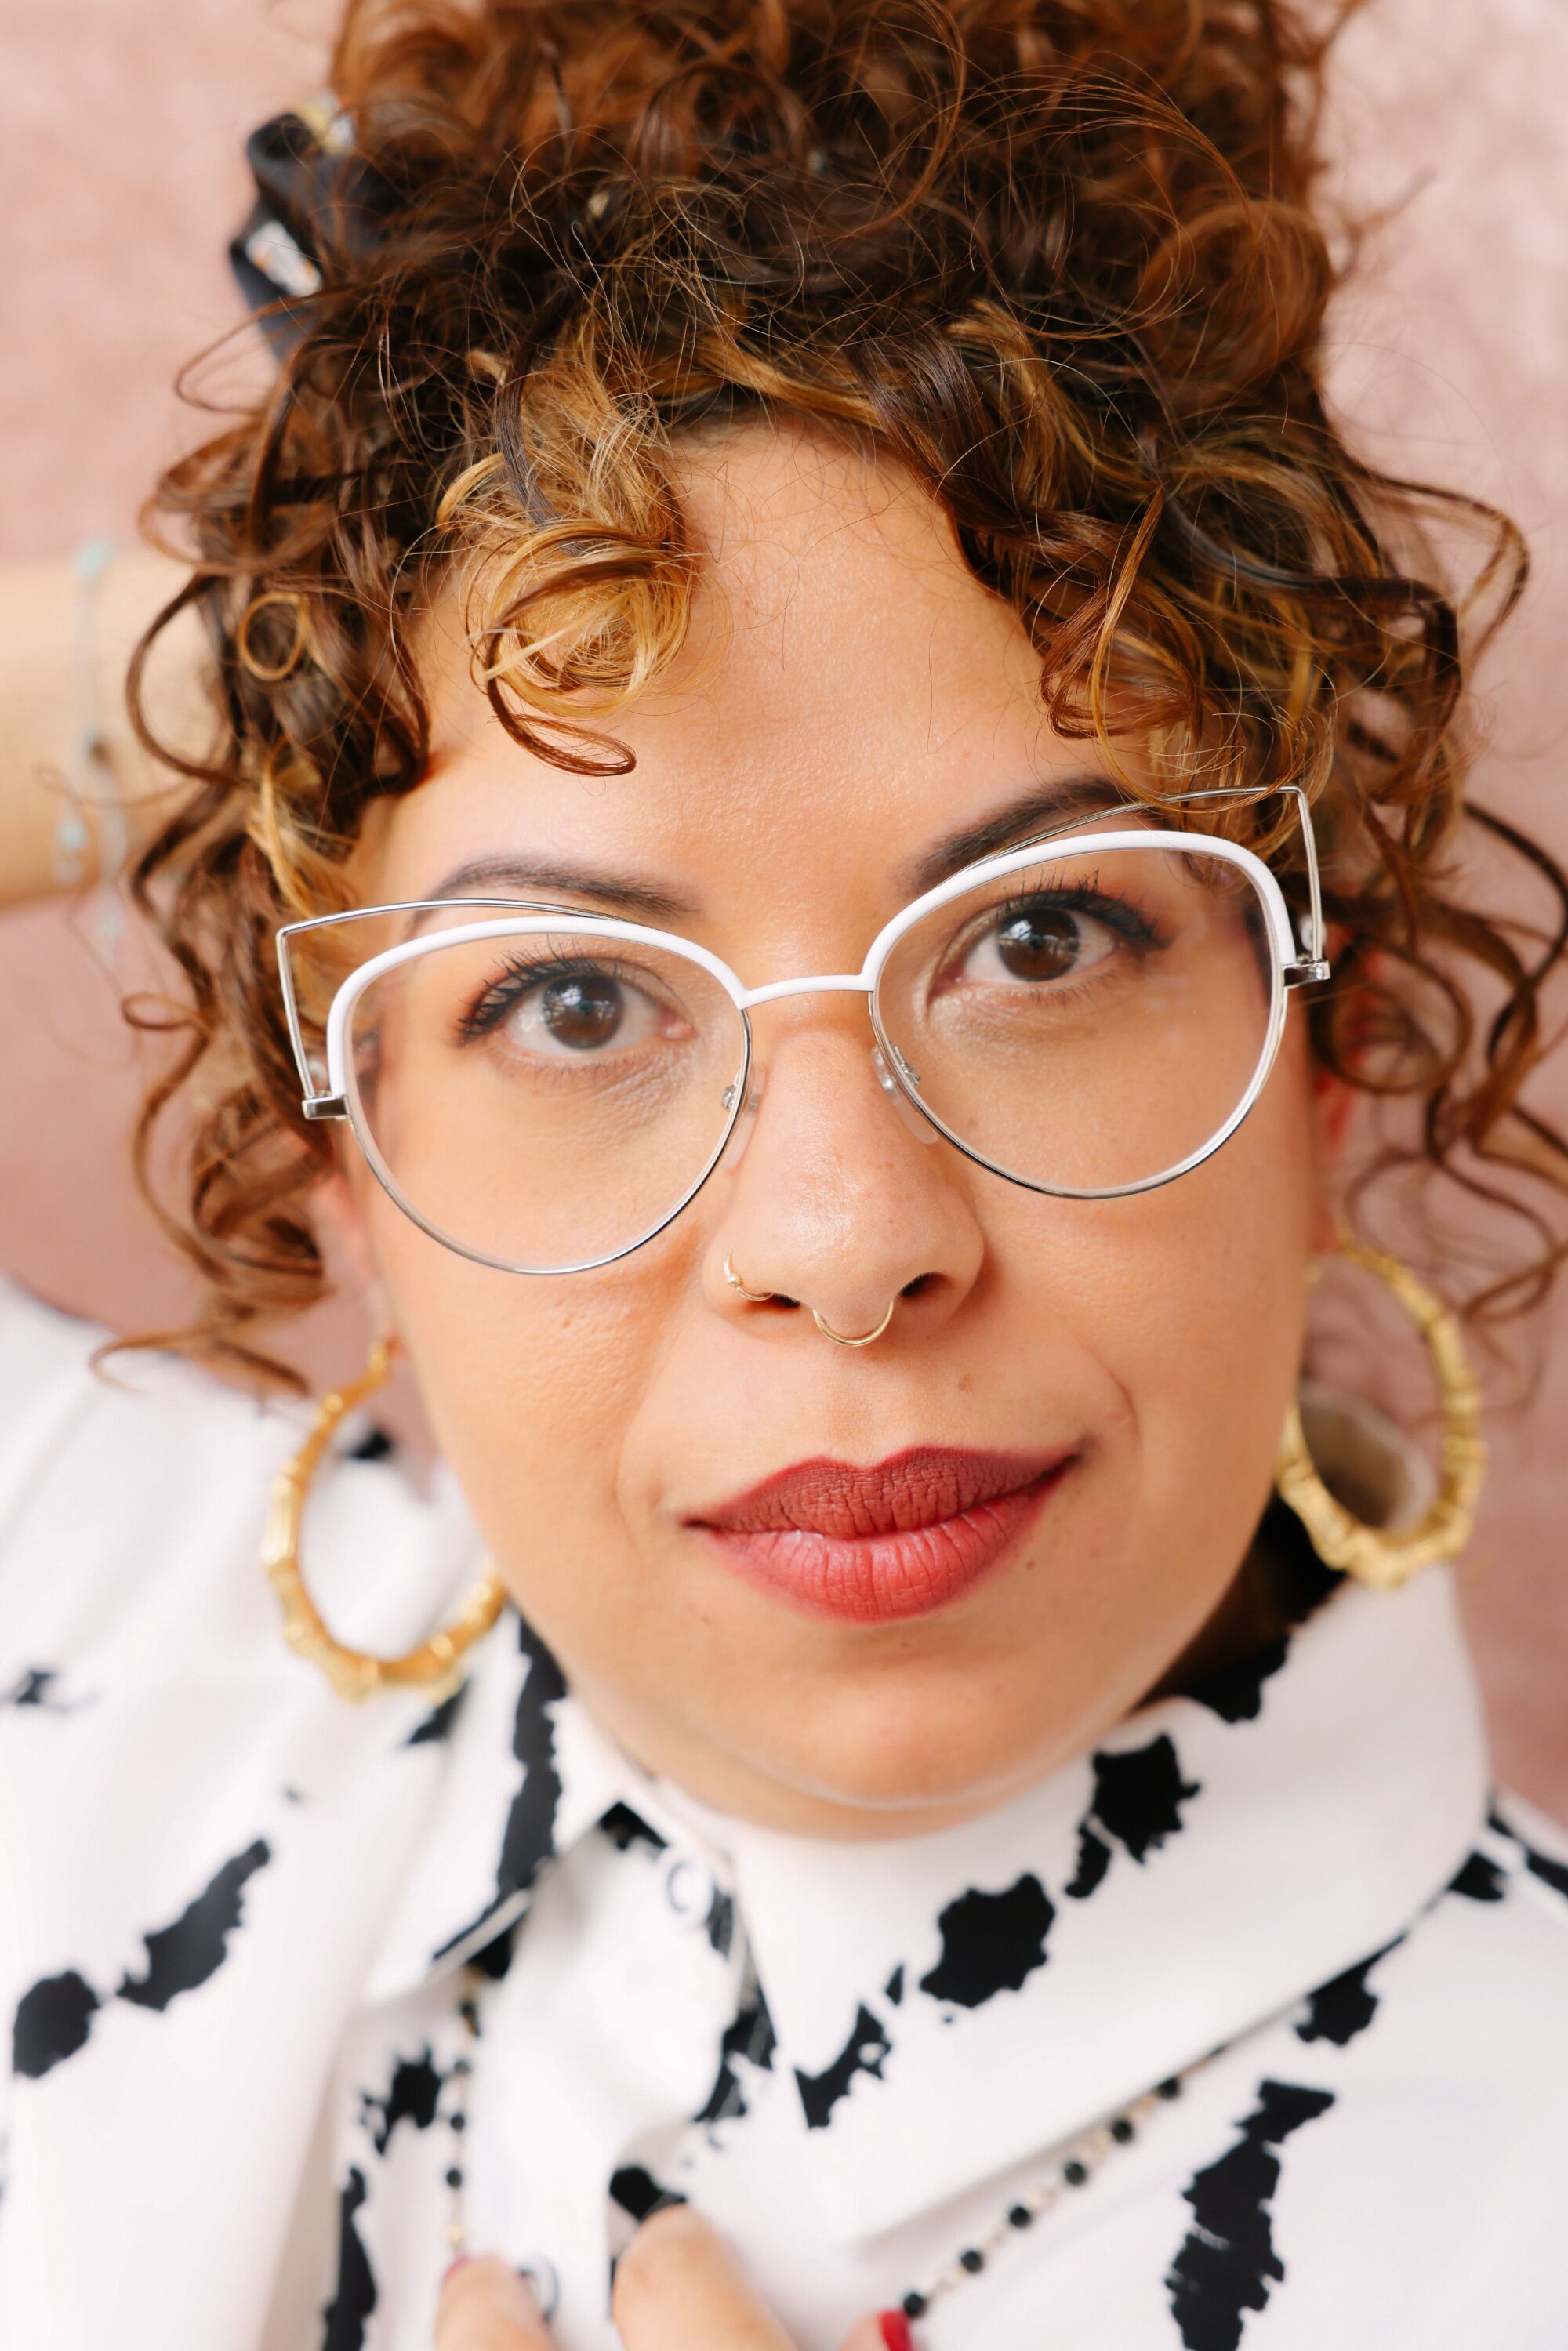 A woman with white framed glasses and red lipstick poses for a portrait